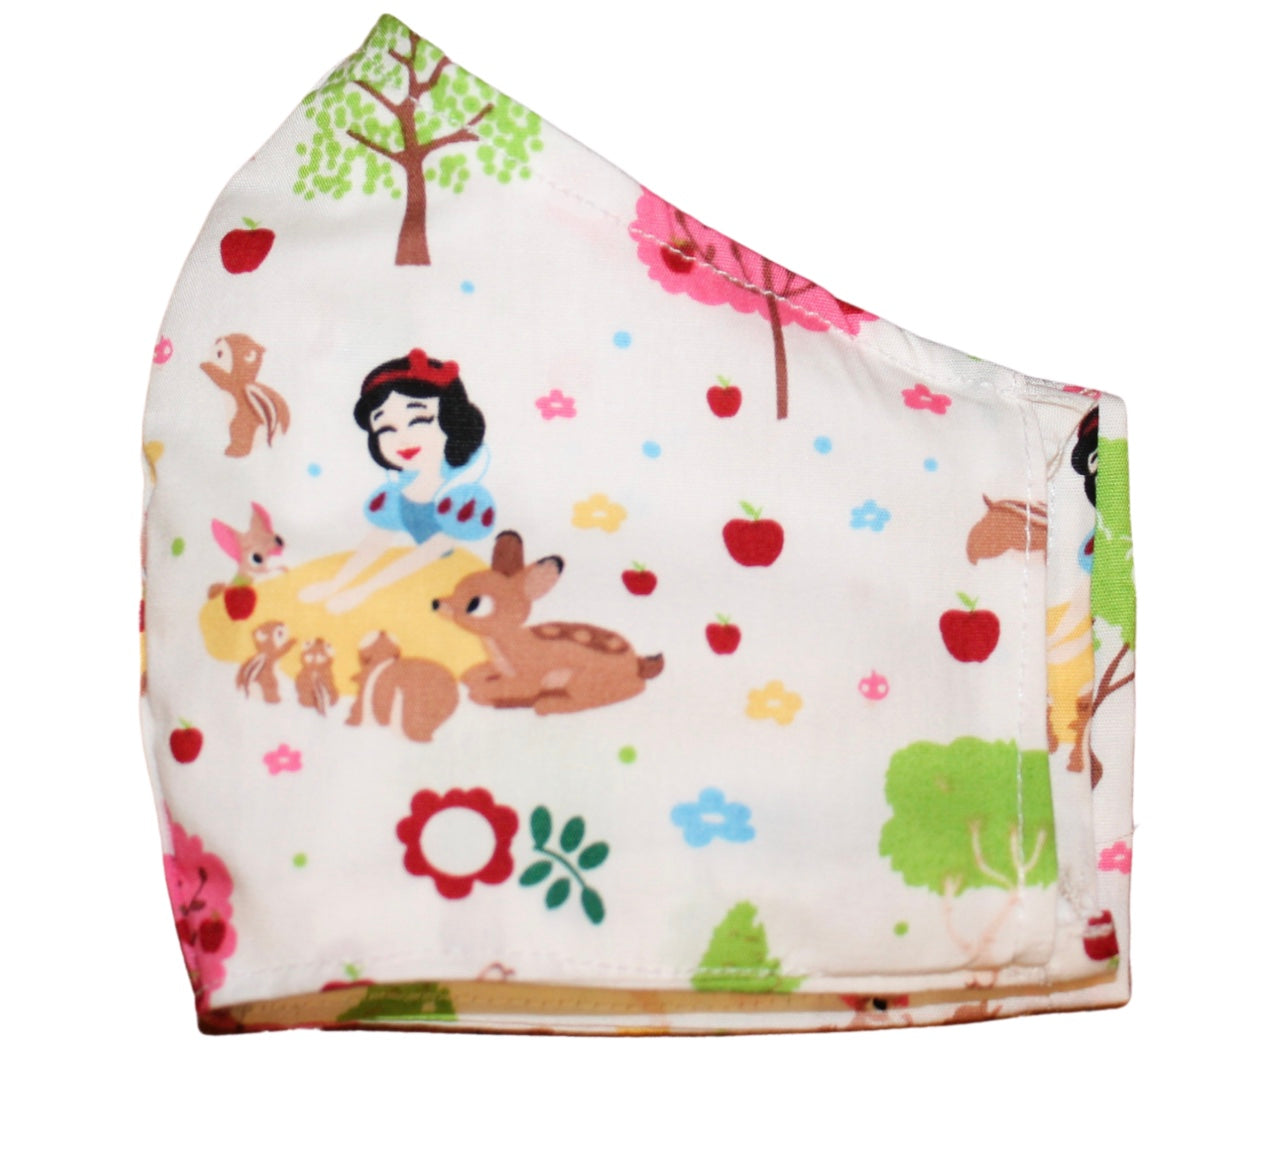 Snow White Handmade Fabric Face Mask 100% Cotton Reusable with Filter Pocket For Adults & Children